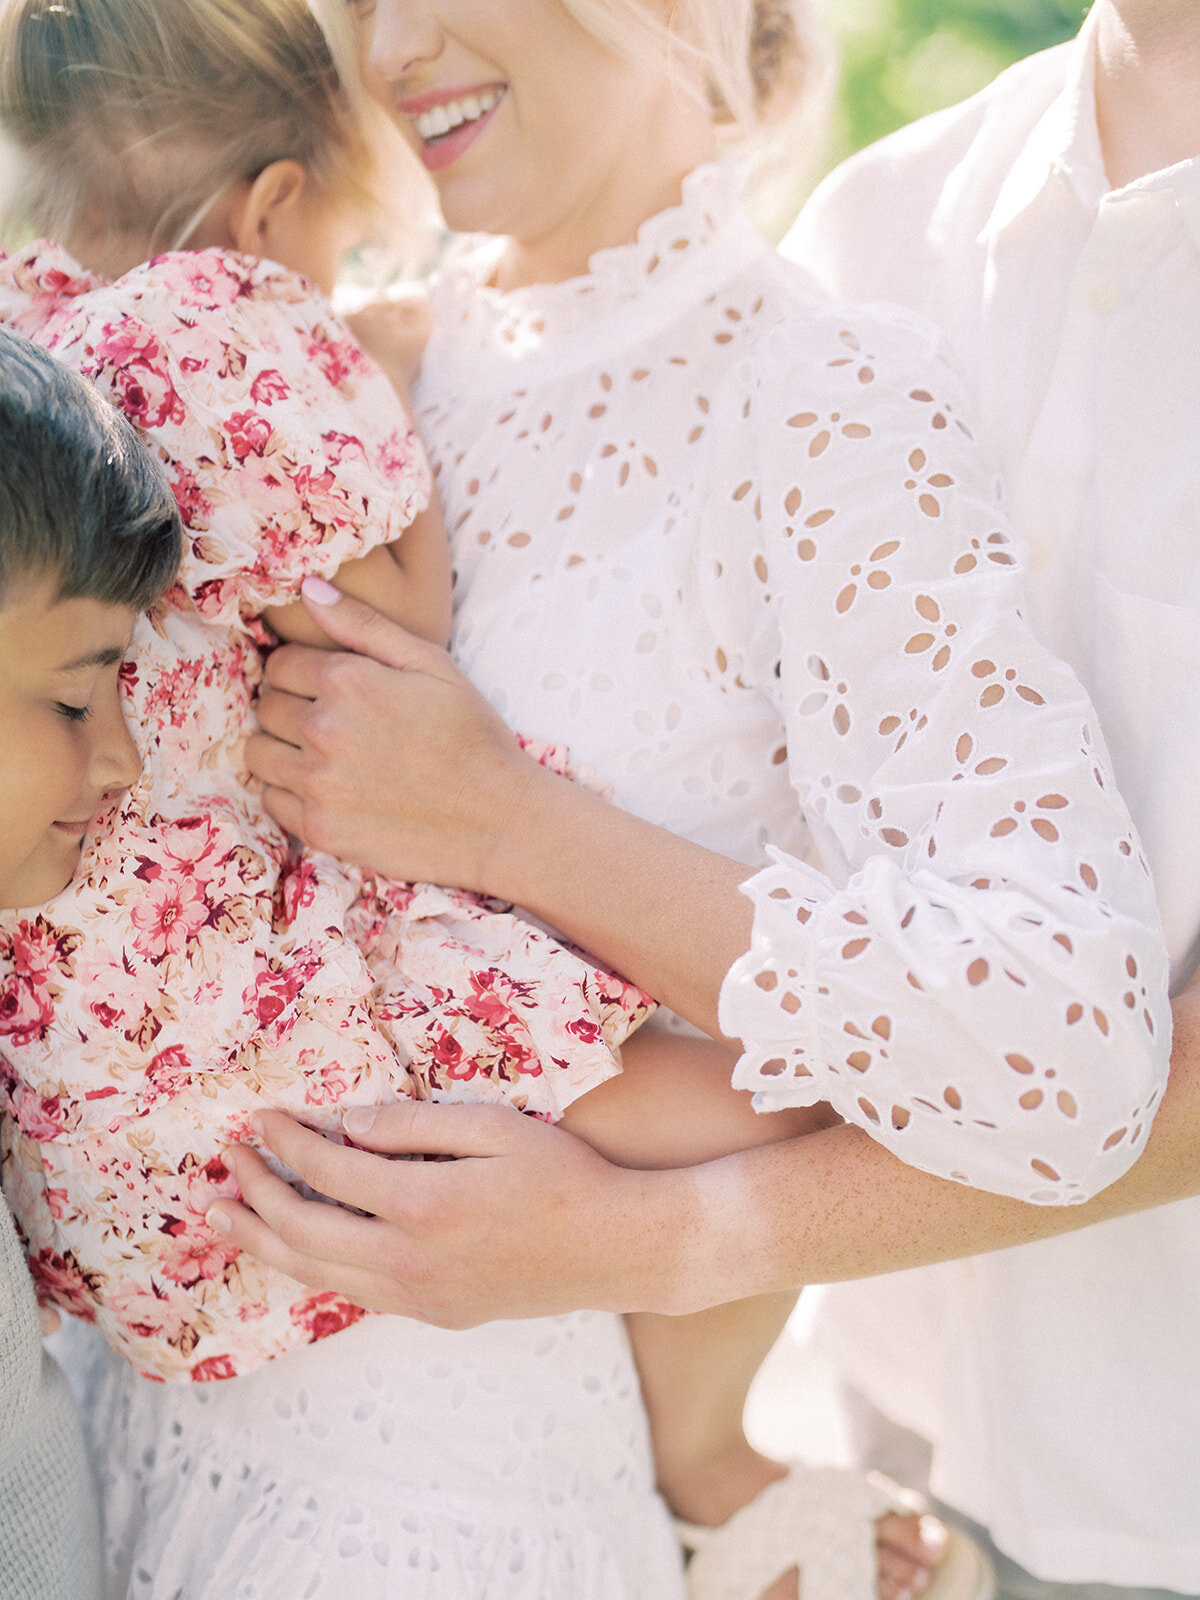 Close-up view of mother holding her toddler daughter in pink floral dress as her sons lean into her.